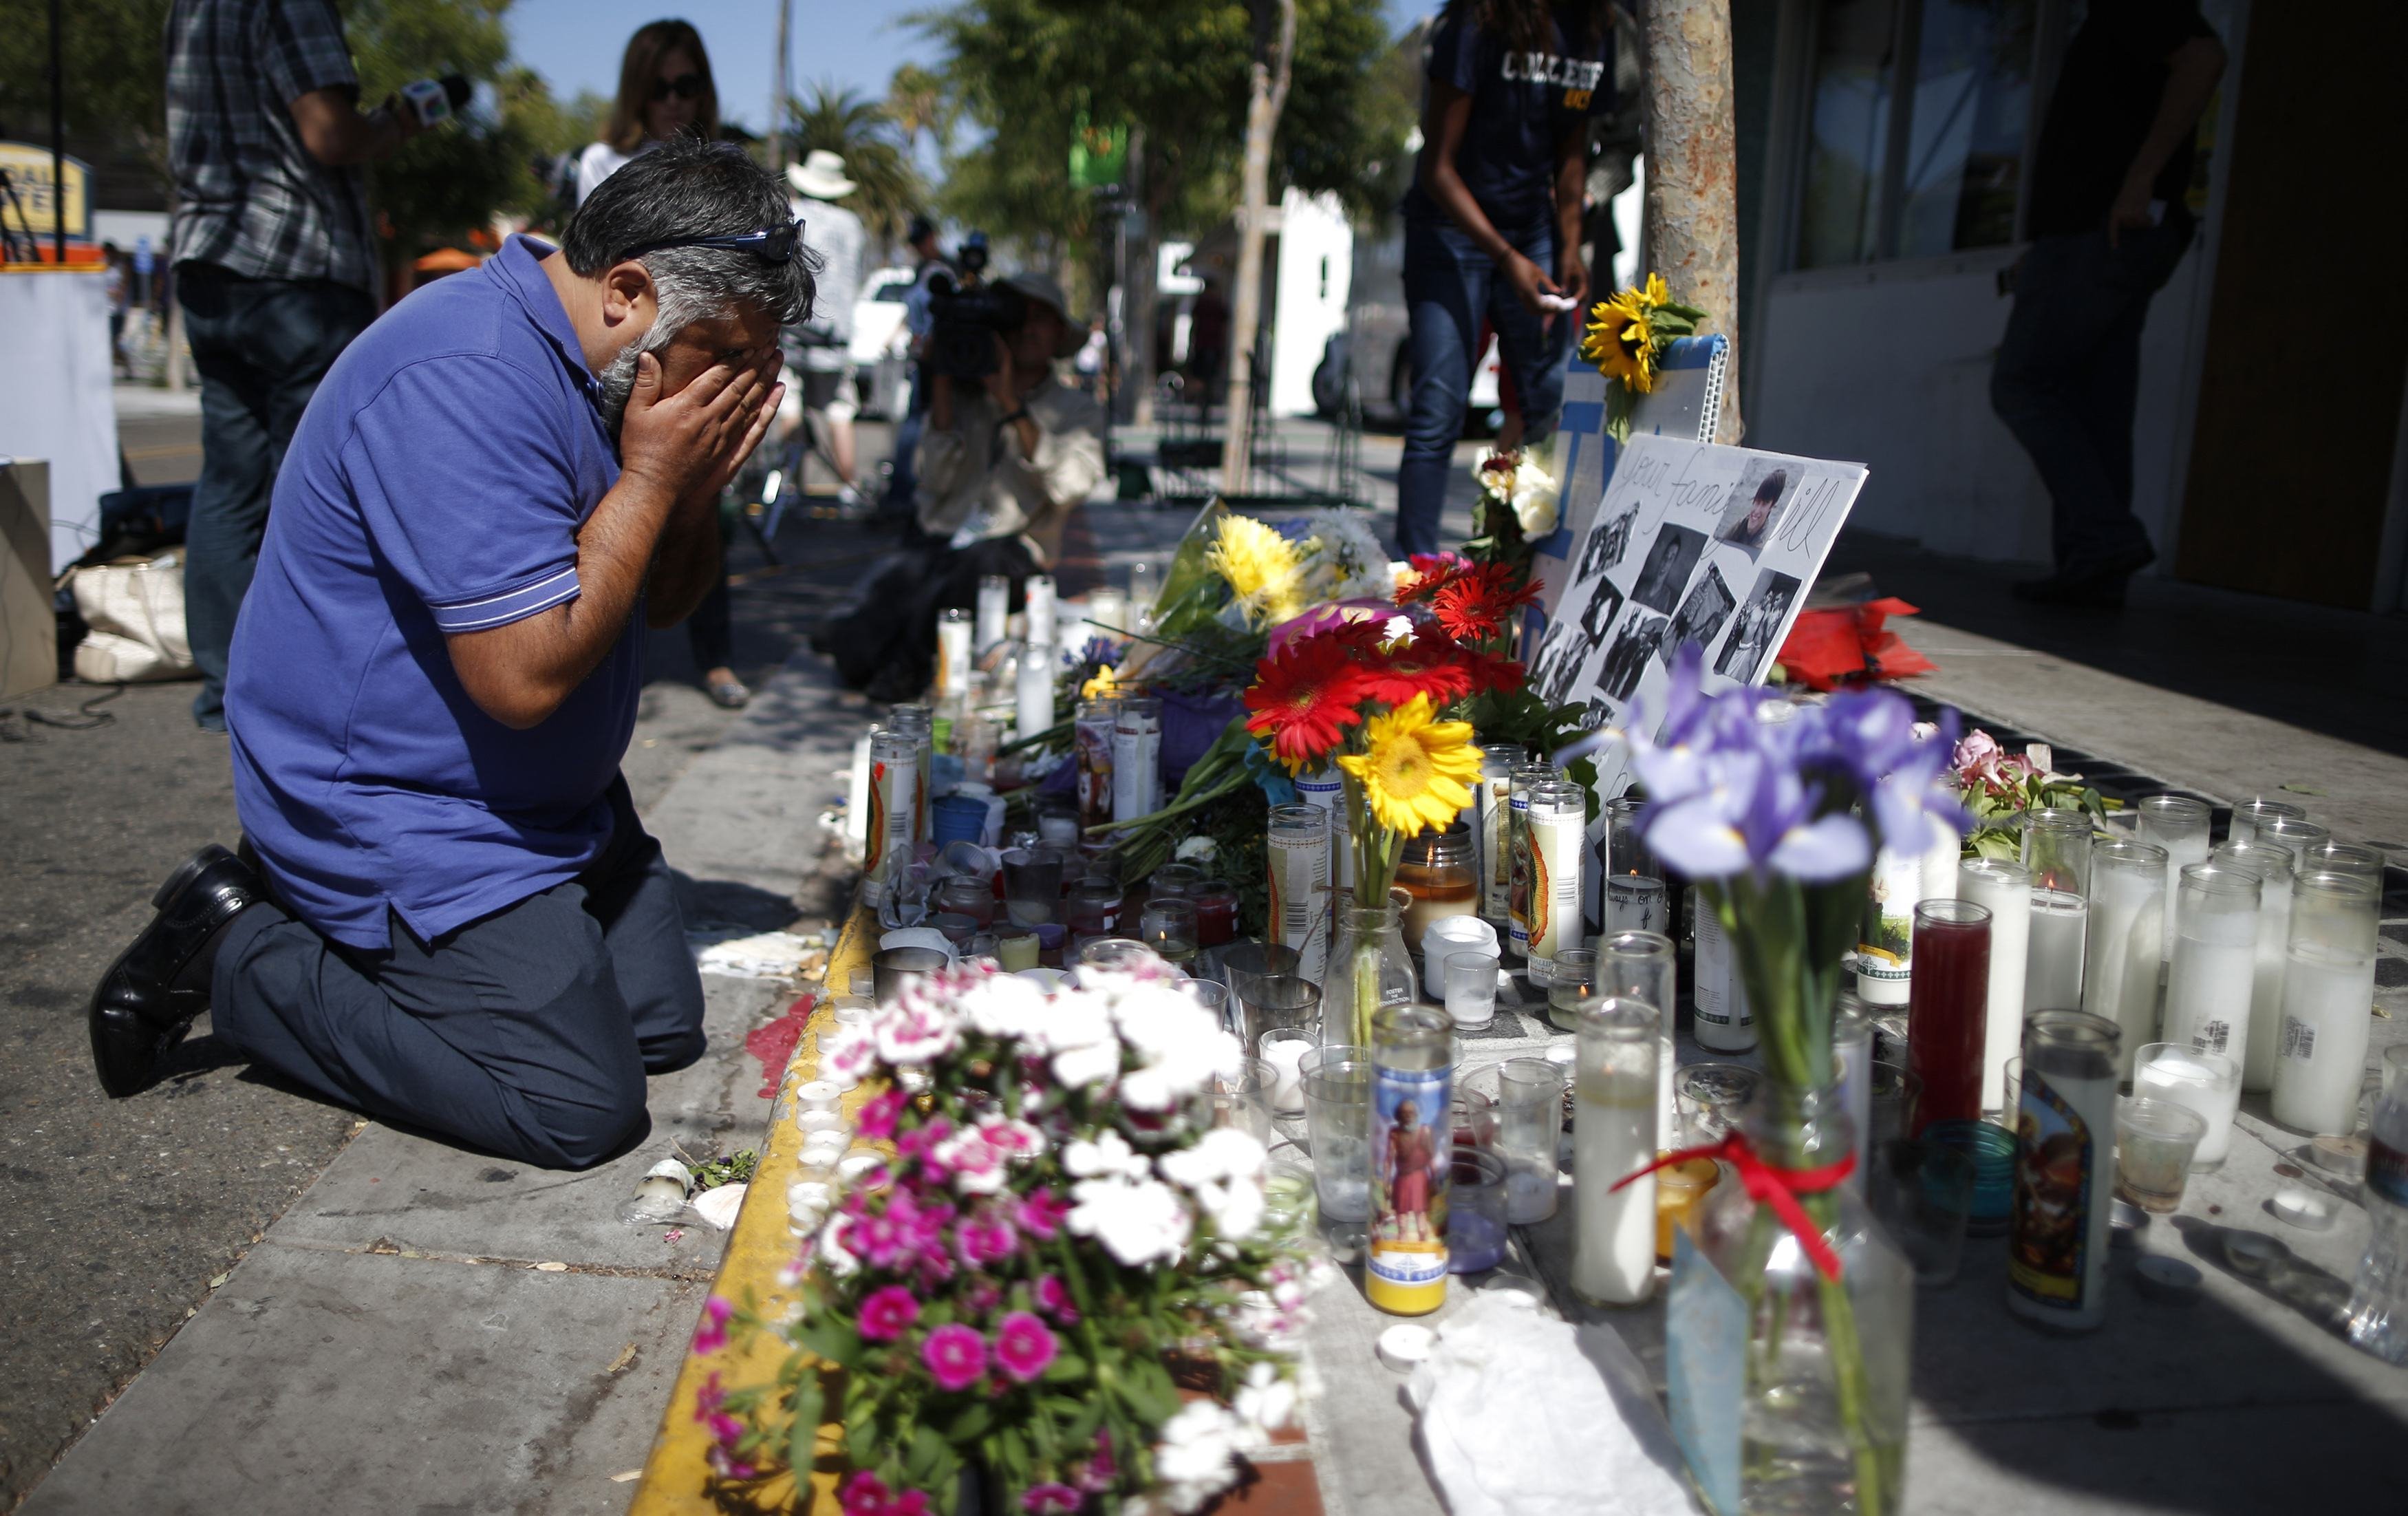 Jose Cardoso, 50, cries in front of a makeshift memorial for 20-year-old UCSB student Christopher Ross Michaels-Martinez outside a deli in Santa Barbara, Calif., on May 25, 2014 (Lucy Nicholson—Reuters)